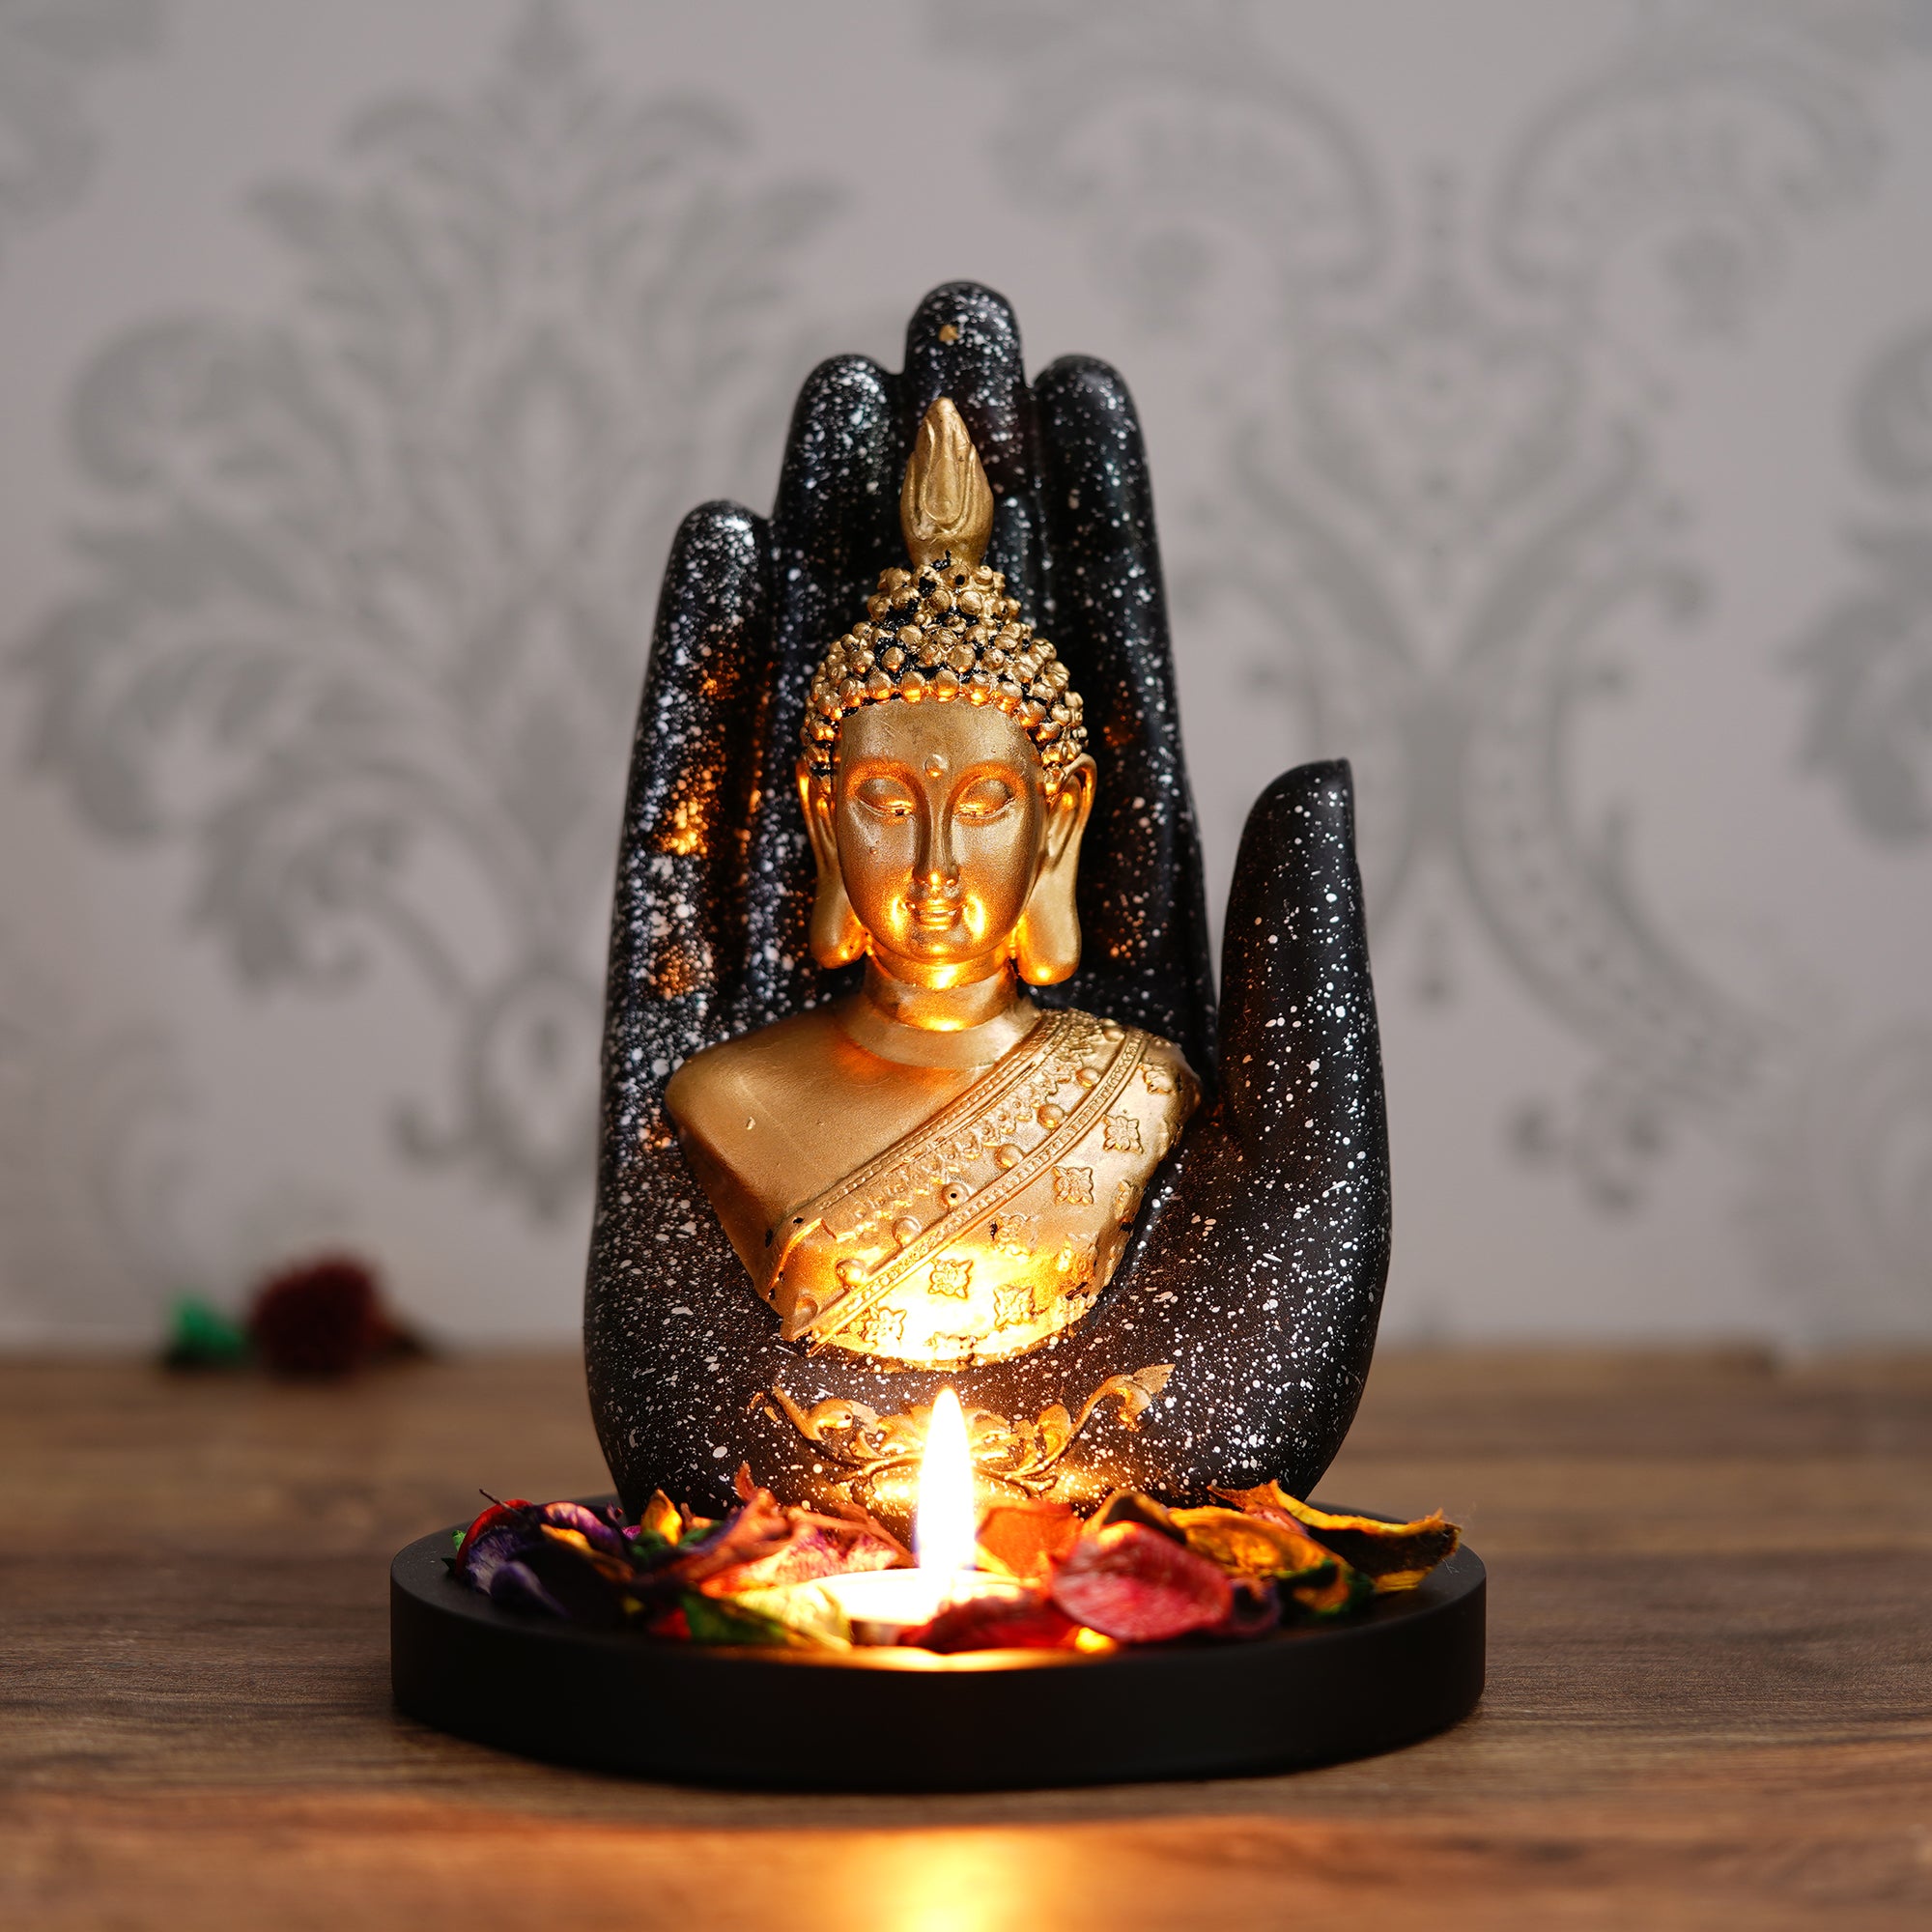 Polyresin Black and Golden Handcrafted Palm Buddha Statue with Wooden Base, Fragranced Petals and Tealight 1